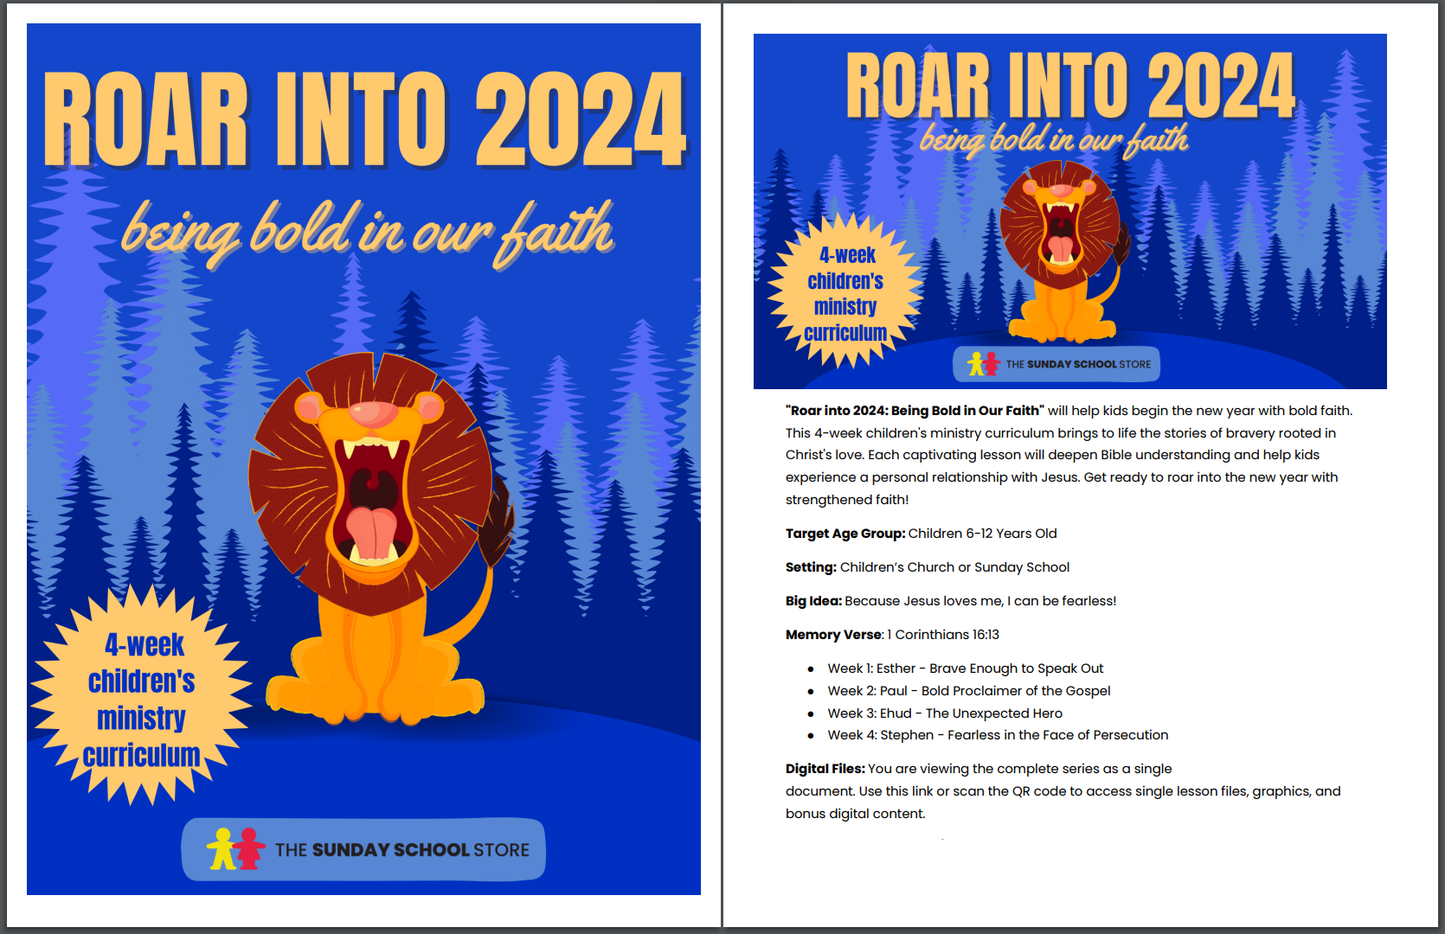 Esther - Brave Enough to Speak Out 🦁 Free Sample Lesson from "Roar into 2024"